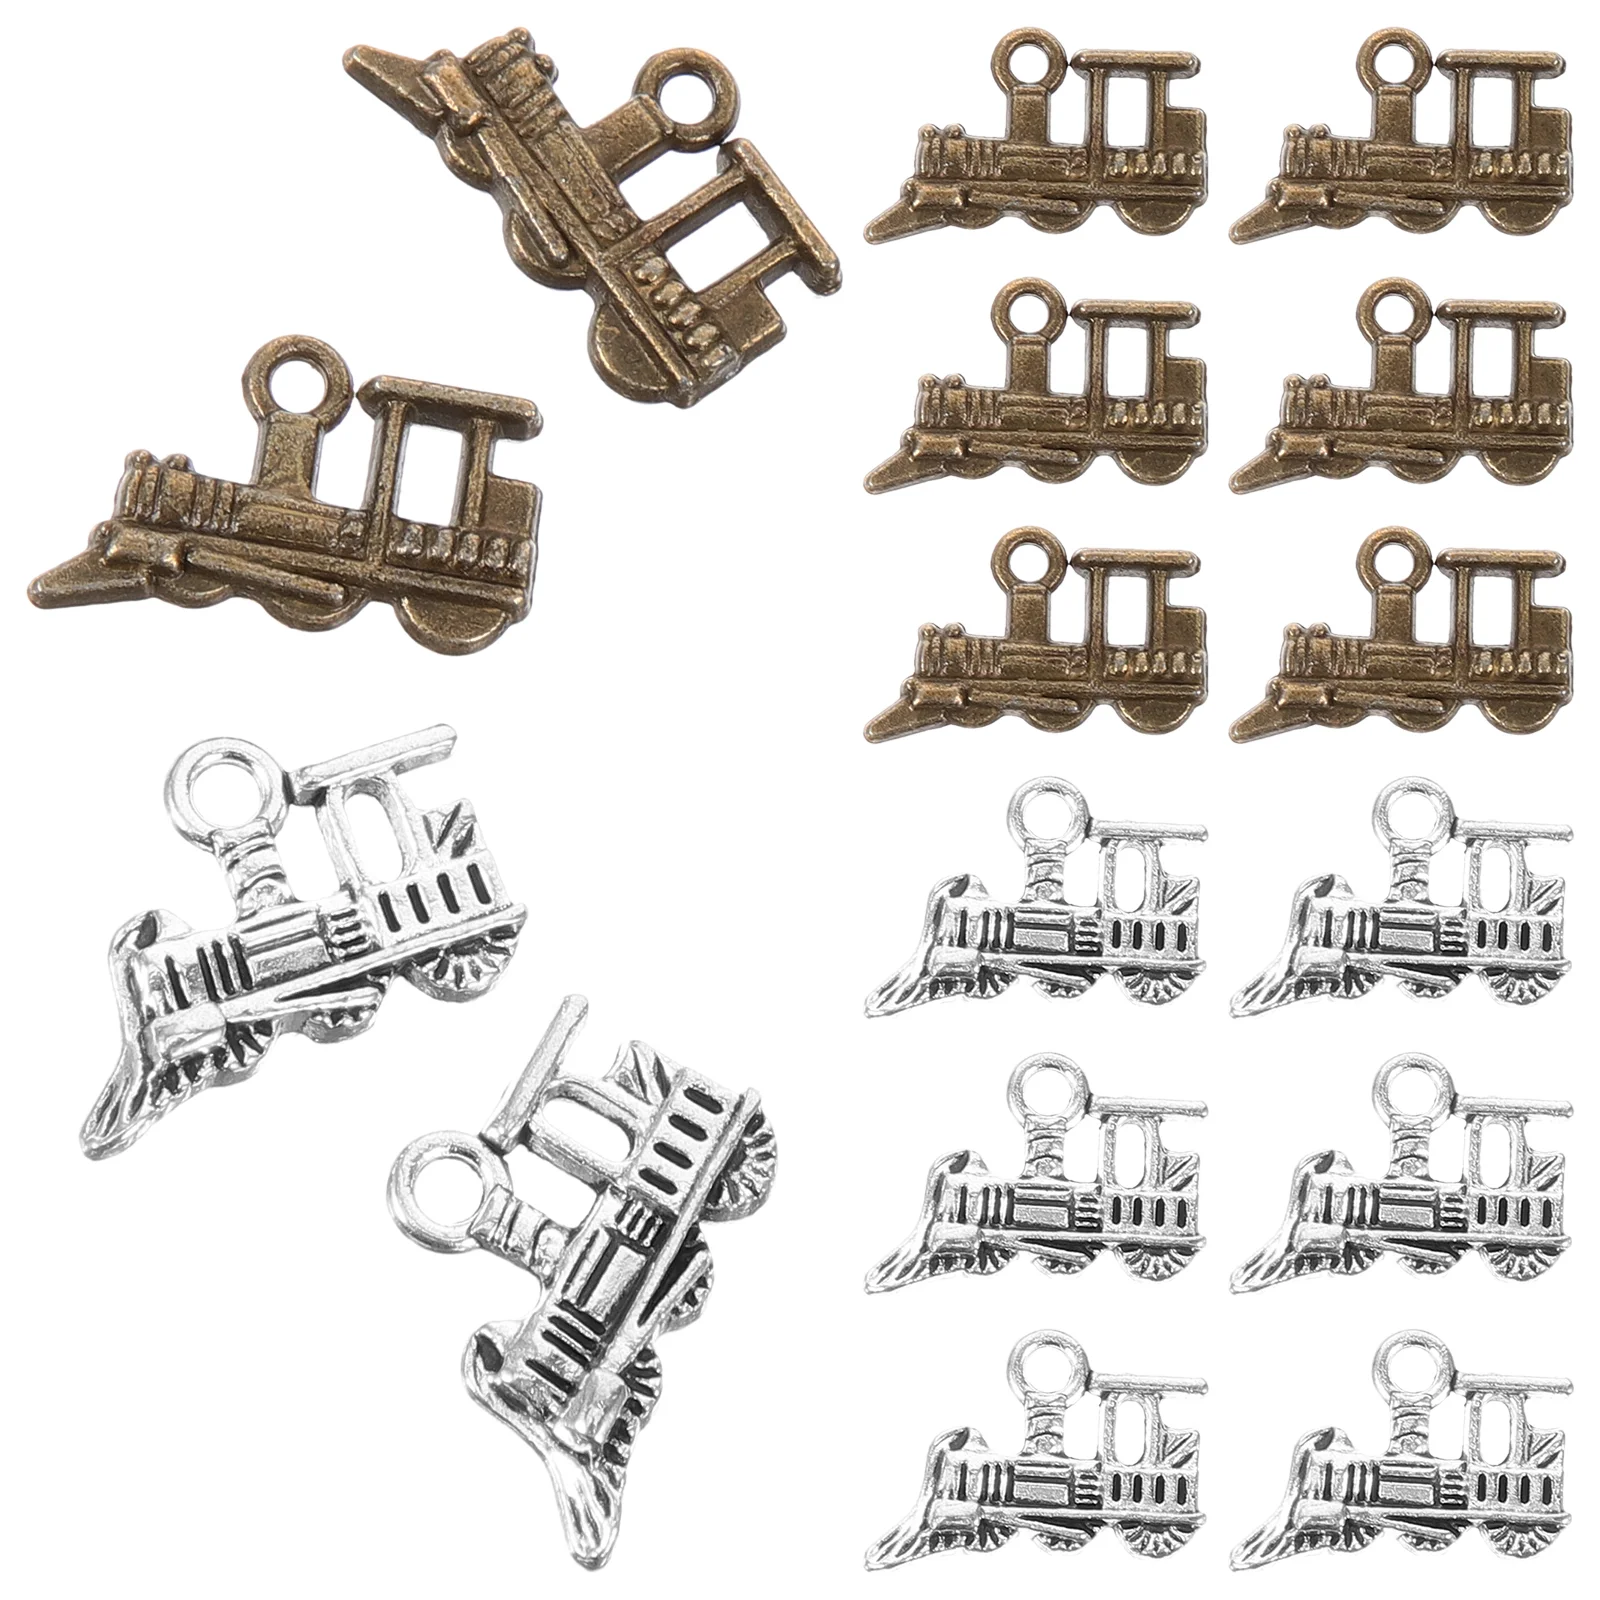 

60pcs Train Charm Pendant Alloy Loose Spacer Beads For DIY Necklace Bracket Jewelry Making Accessory